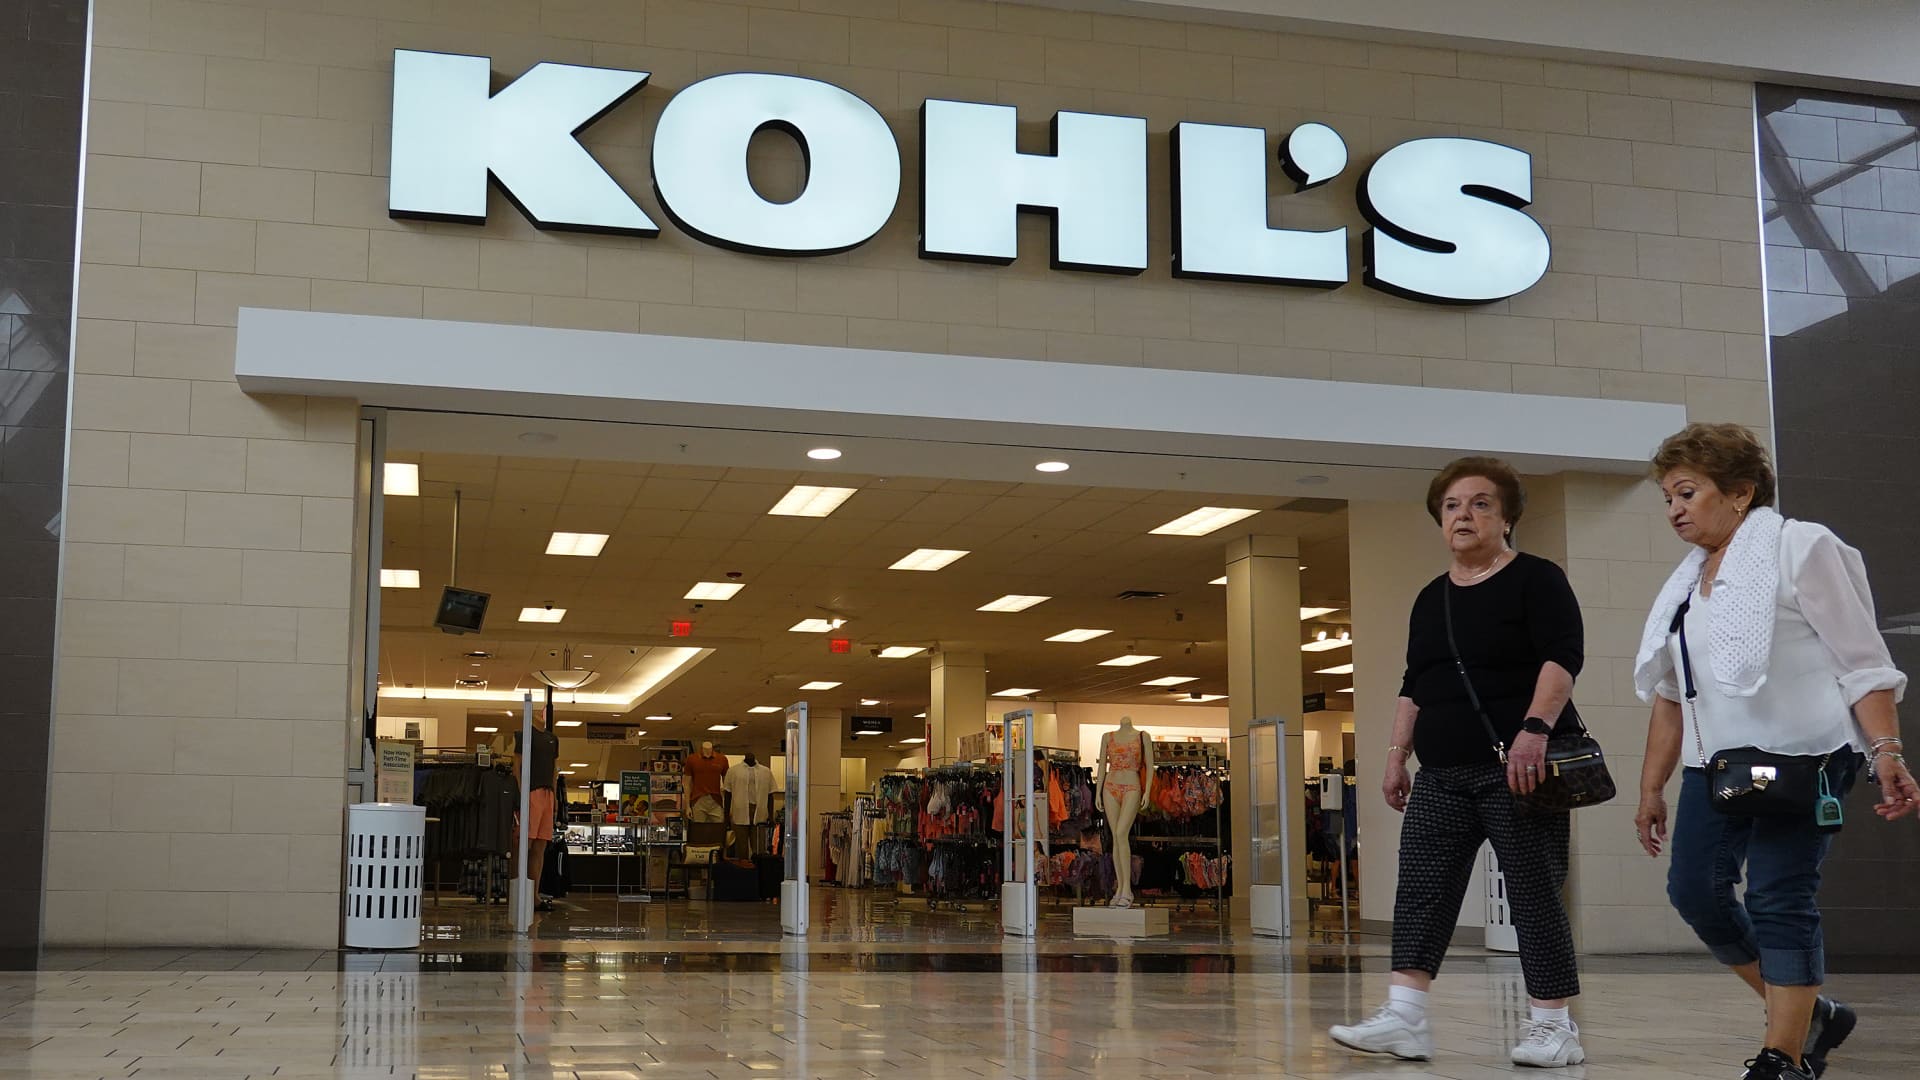 Stocks making the biggest moves midday: Kohl’s, Broadcom, Lululemon and more